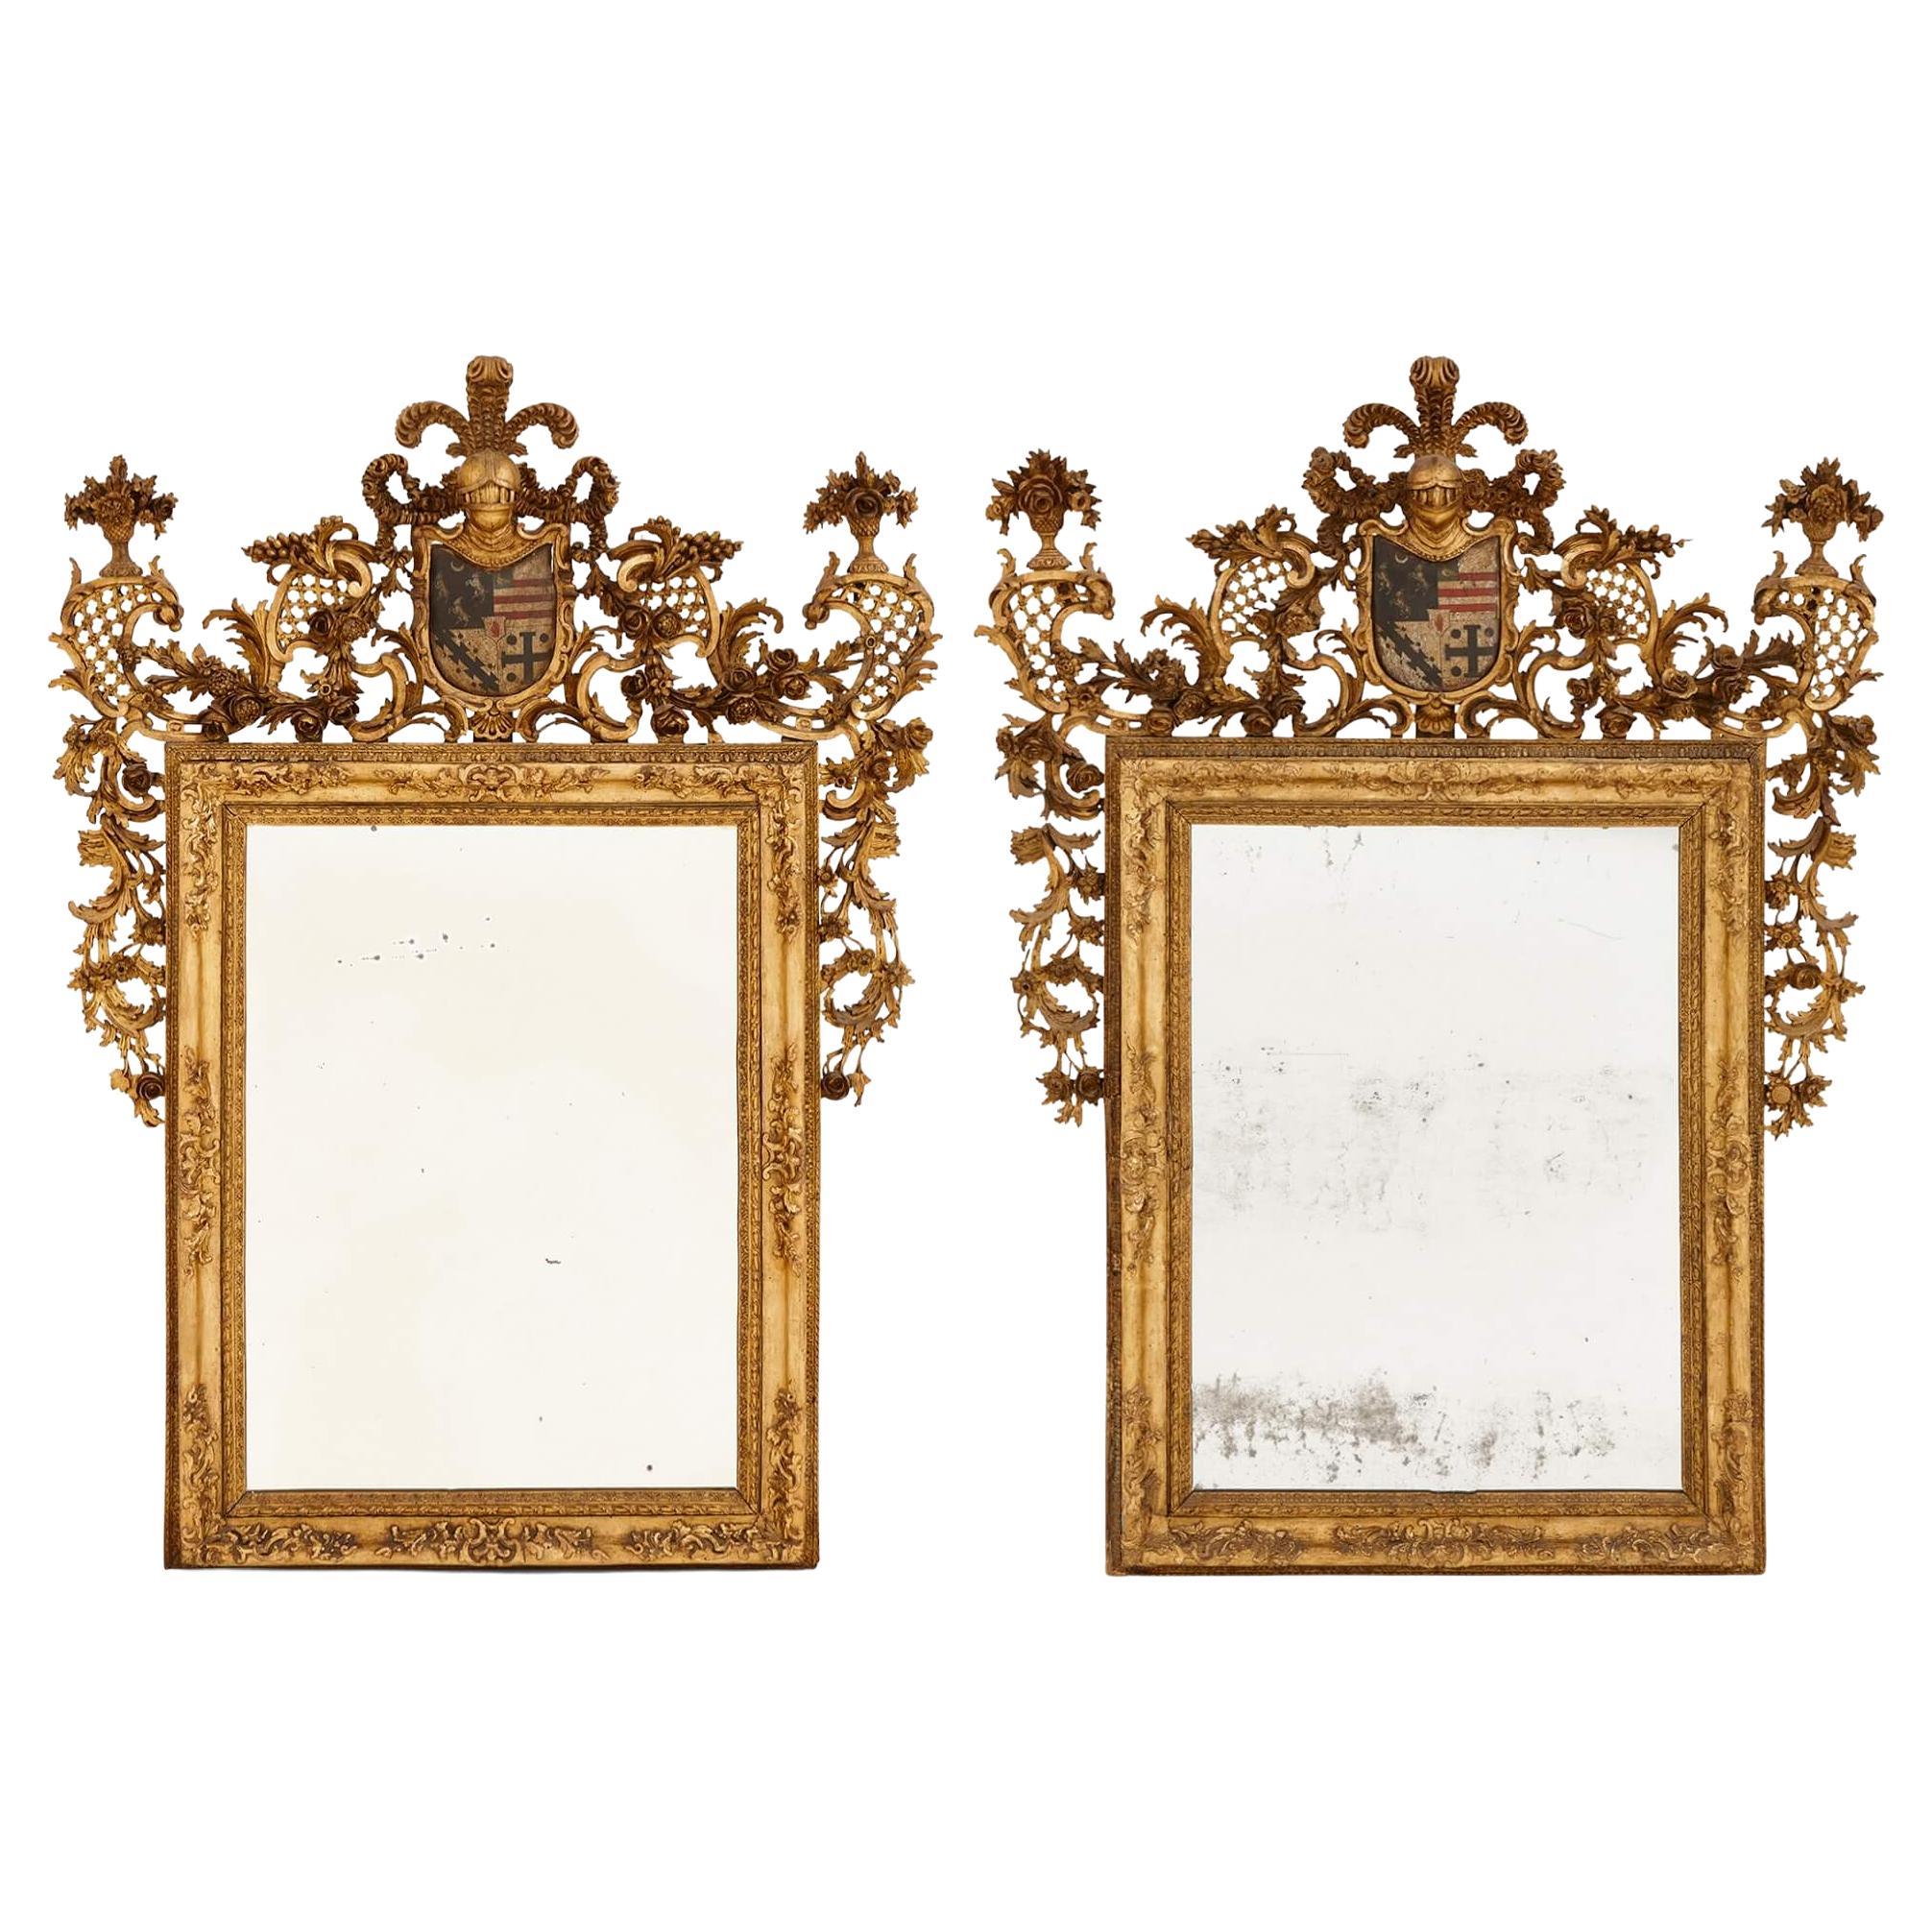 Pair of Giltwood and Polychrome-Decorated Antique Italian Mirrors